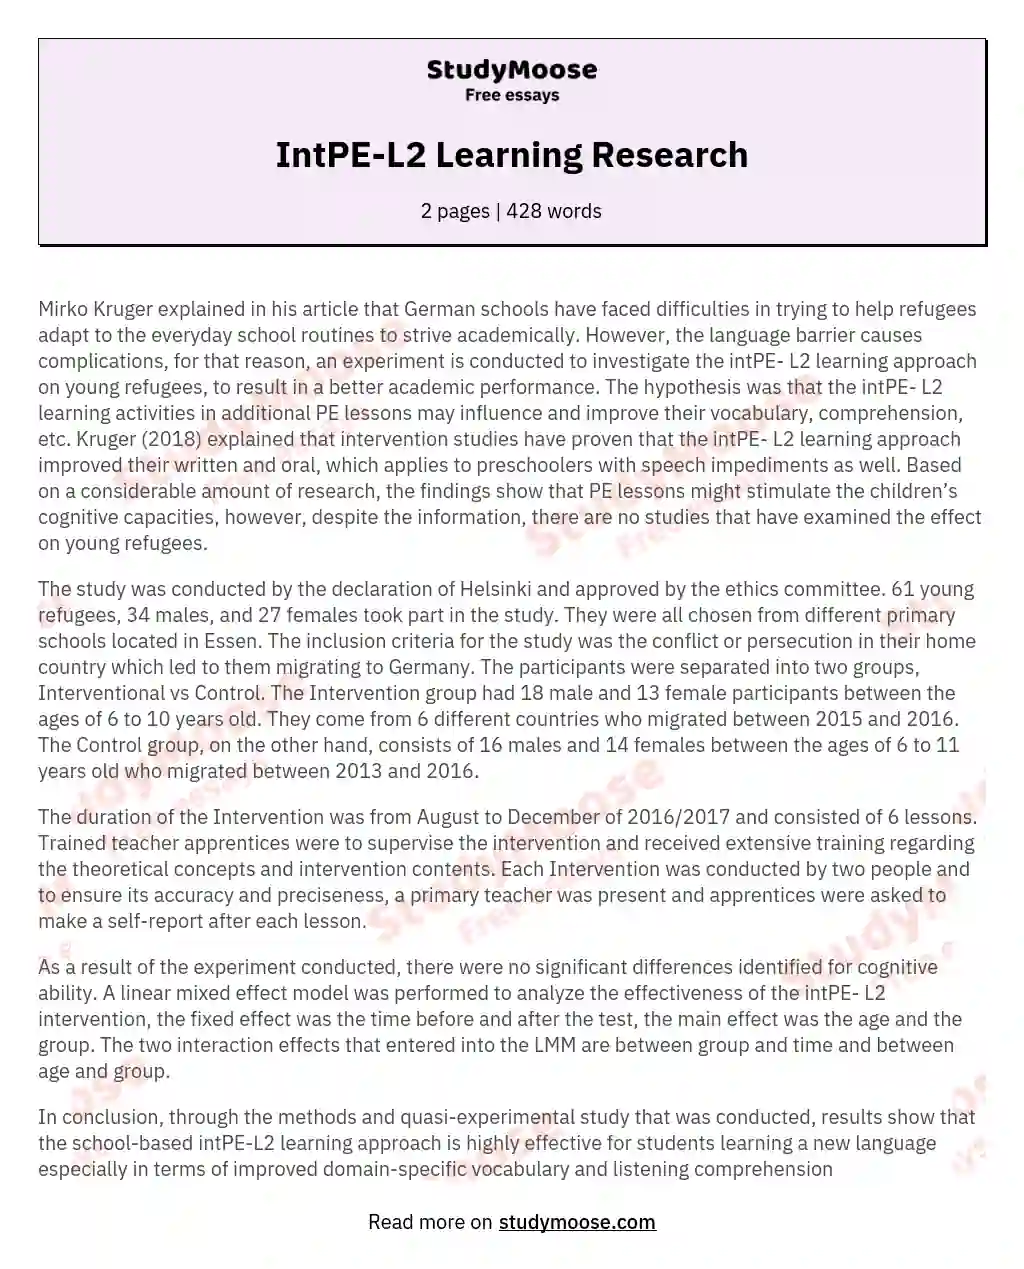 IntPE-L2 Learning Research essay